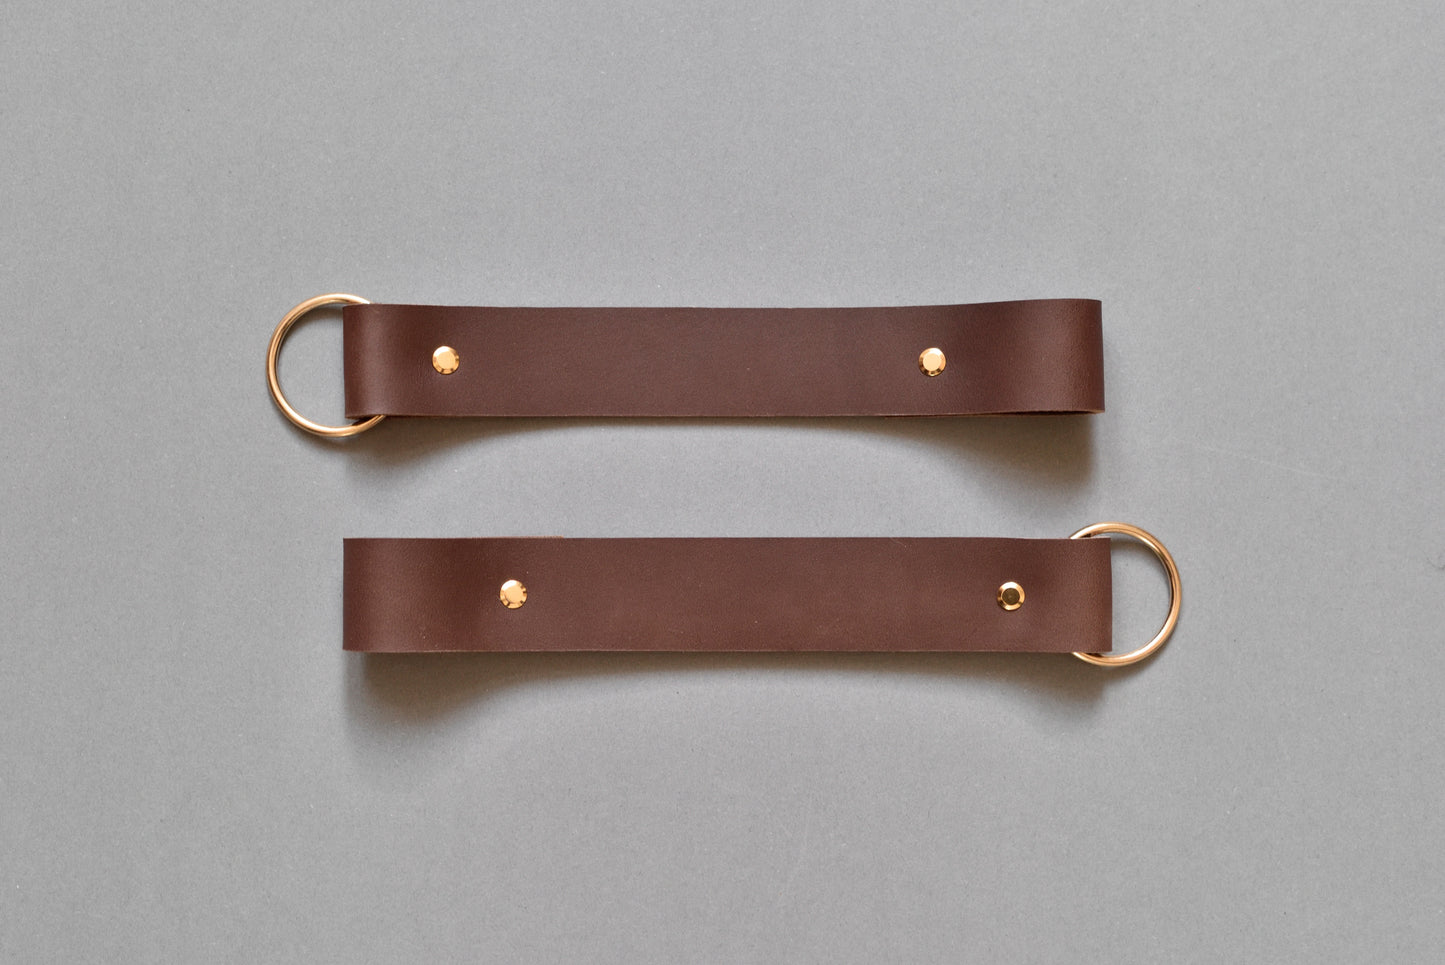 Dark Brown Ceiling-Mounted Leather Strap Lade Maxi #4 - 2 pieces 